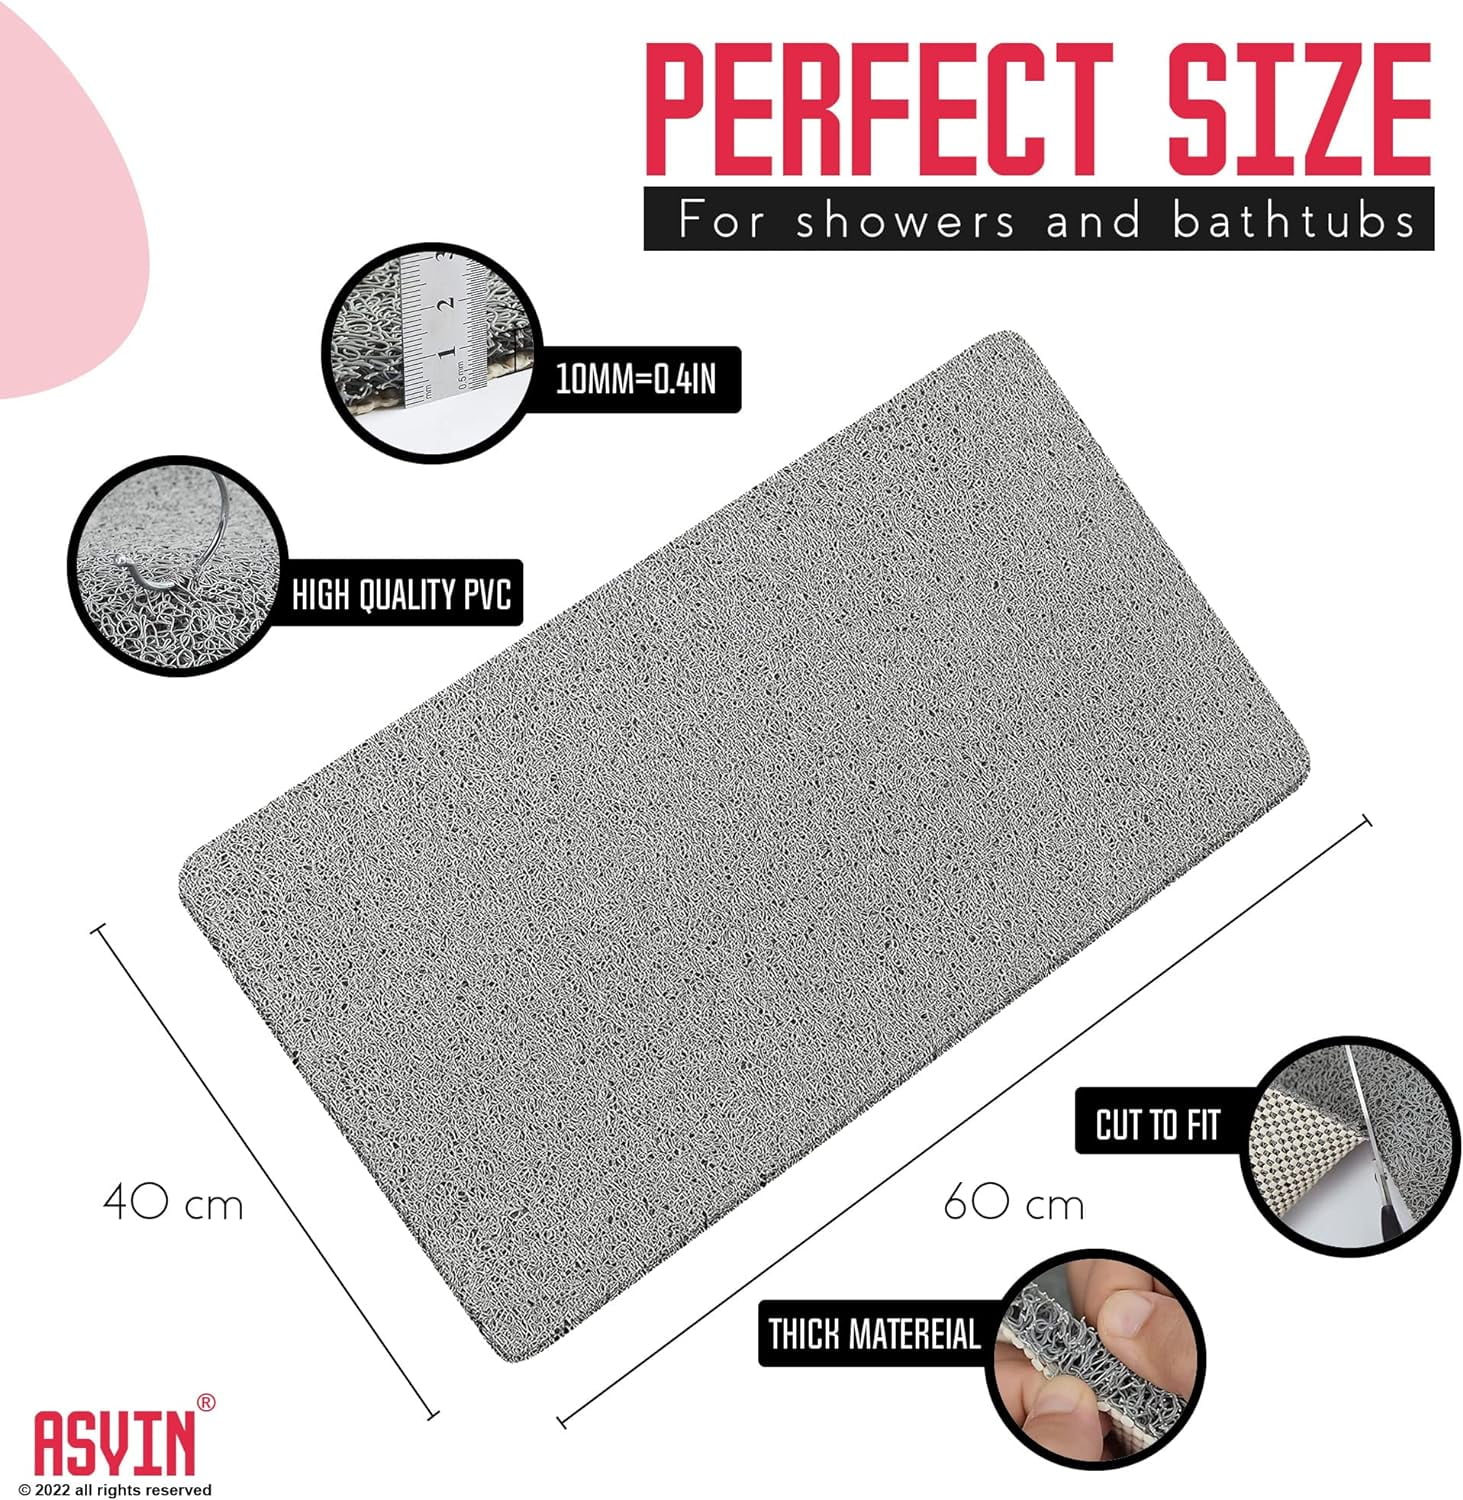  TOHERVIE Bath Tub Shower Mat, Soft PVC Bathroom Mats for Bathtub  Shower Stall, No Suction Cups, Anti-Slip Comfort and Quick Drying (24x16  inch, Grey) : Home & Kitchen